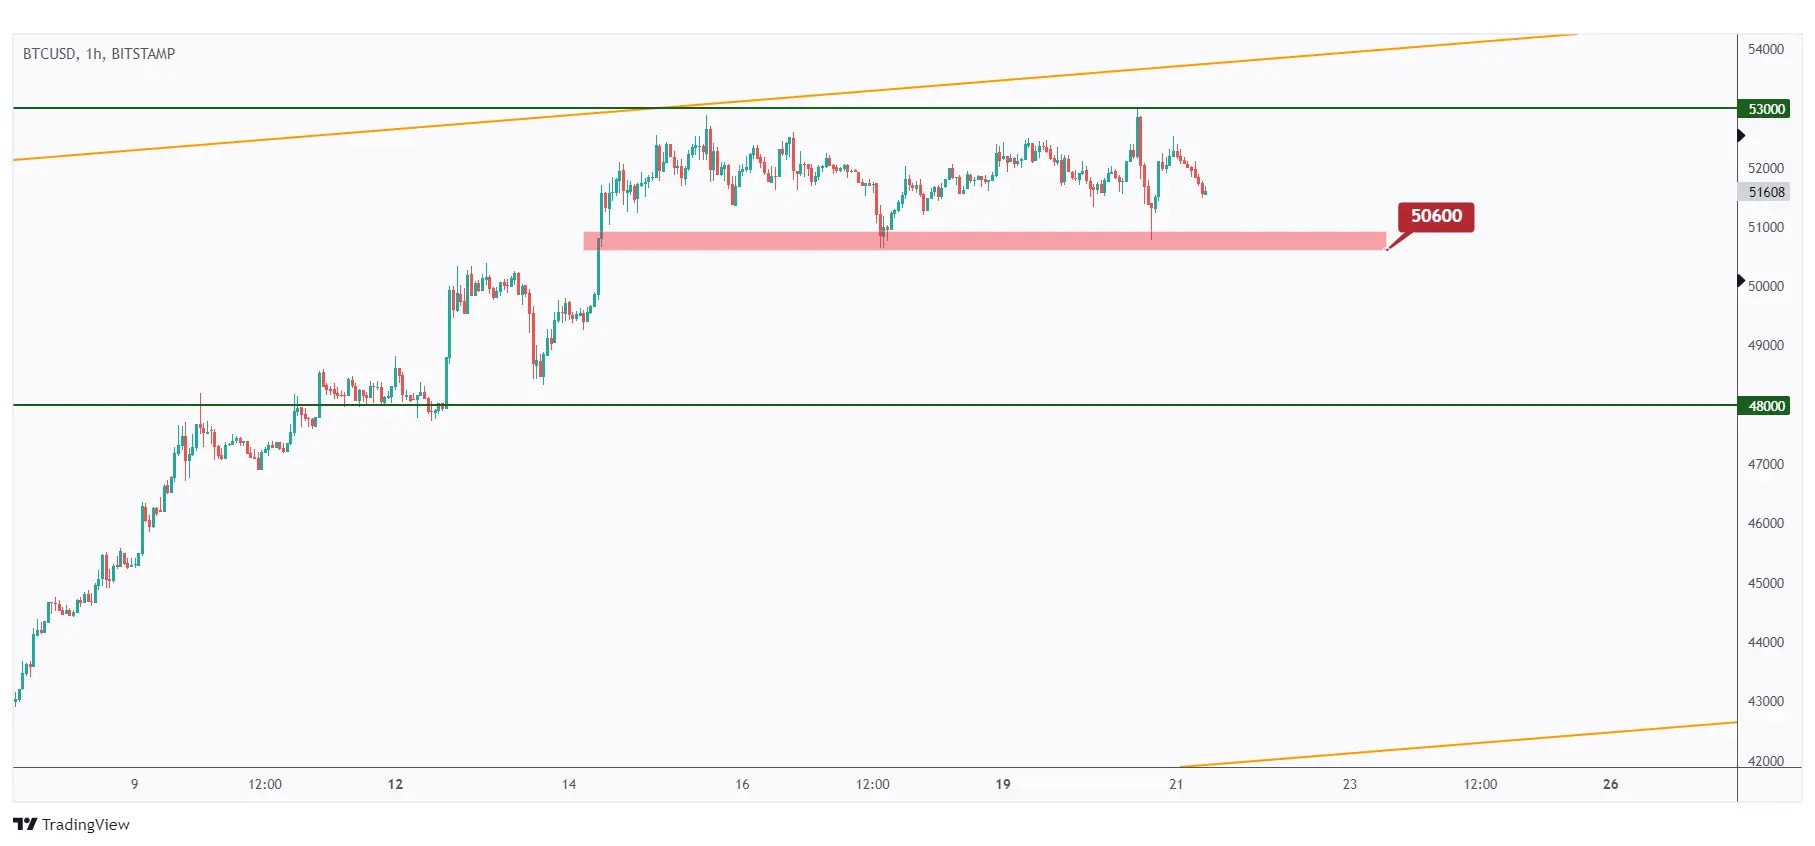 BTC 1h chart hovering inside a narrow range between $50,600 and $53,000.